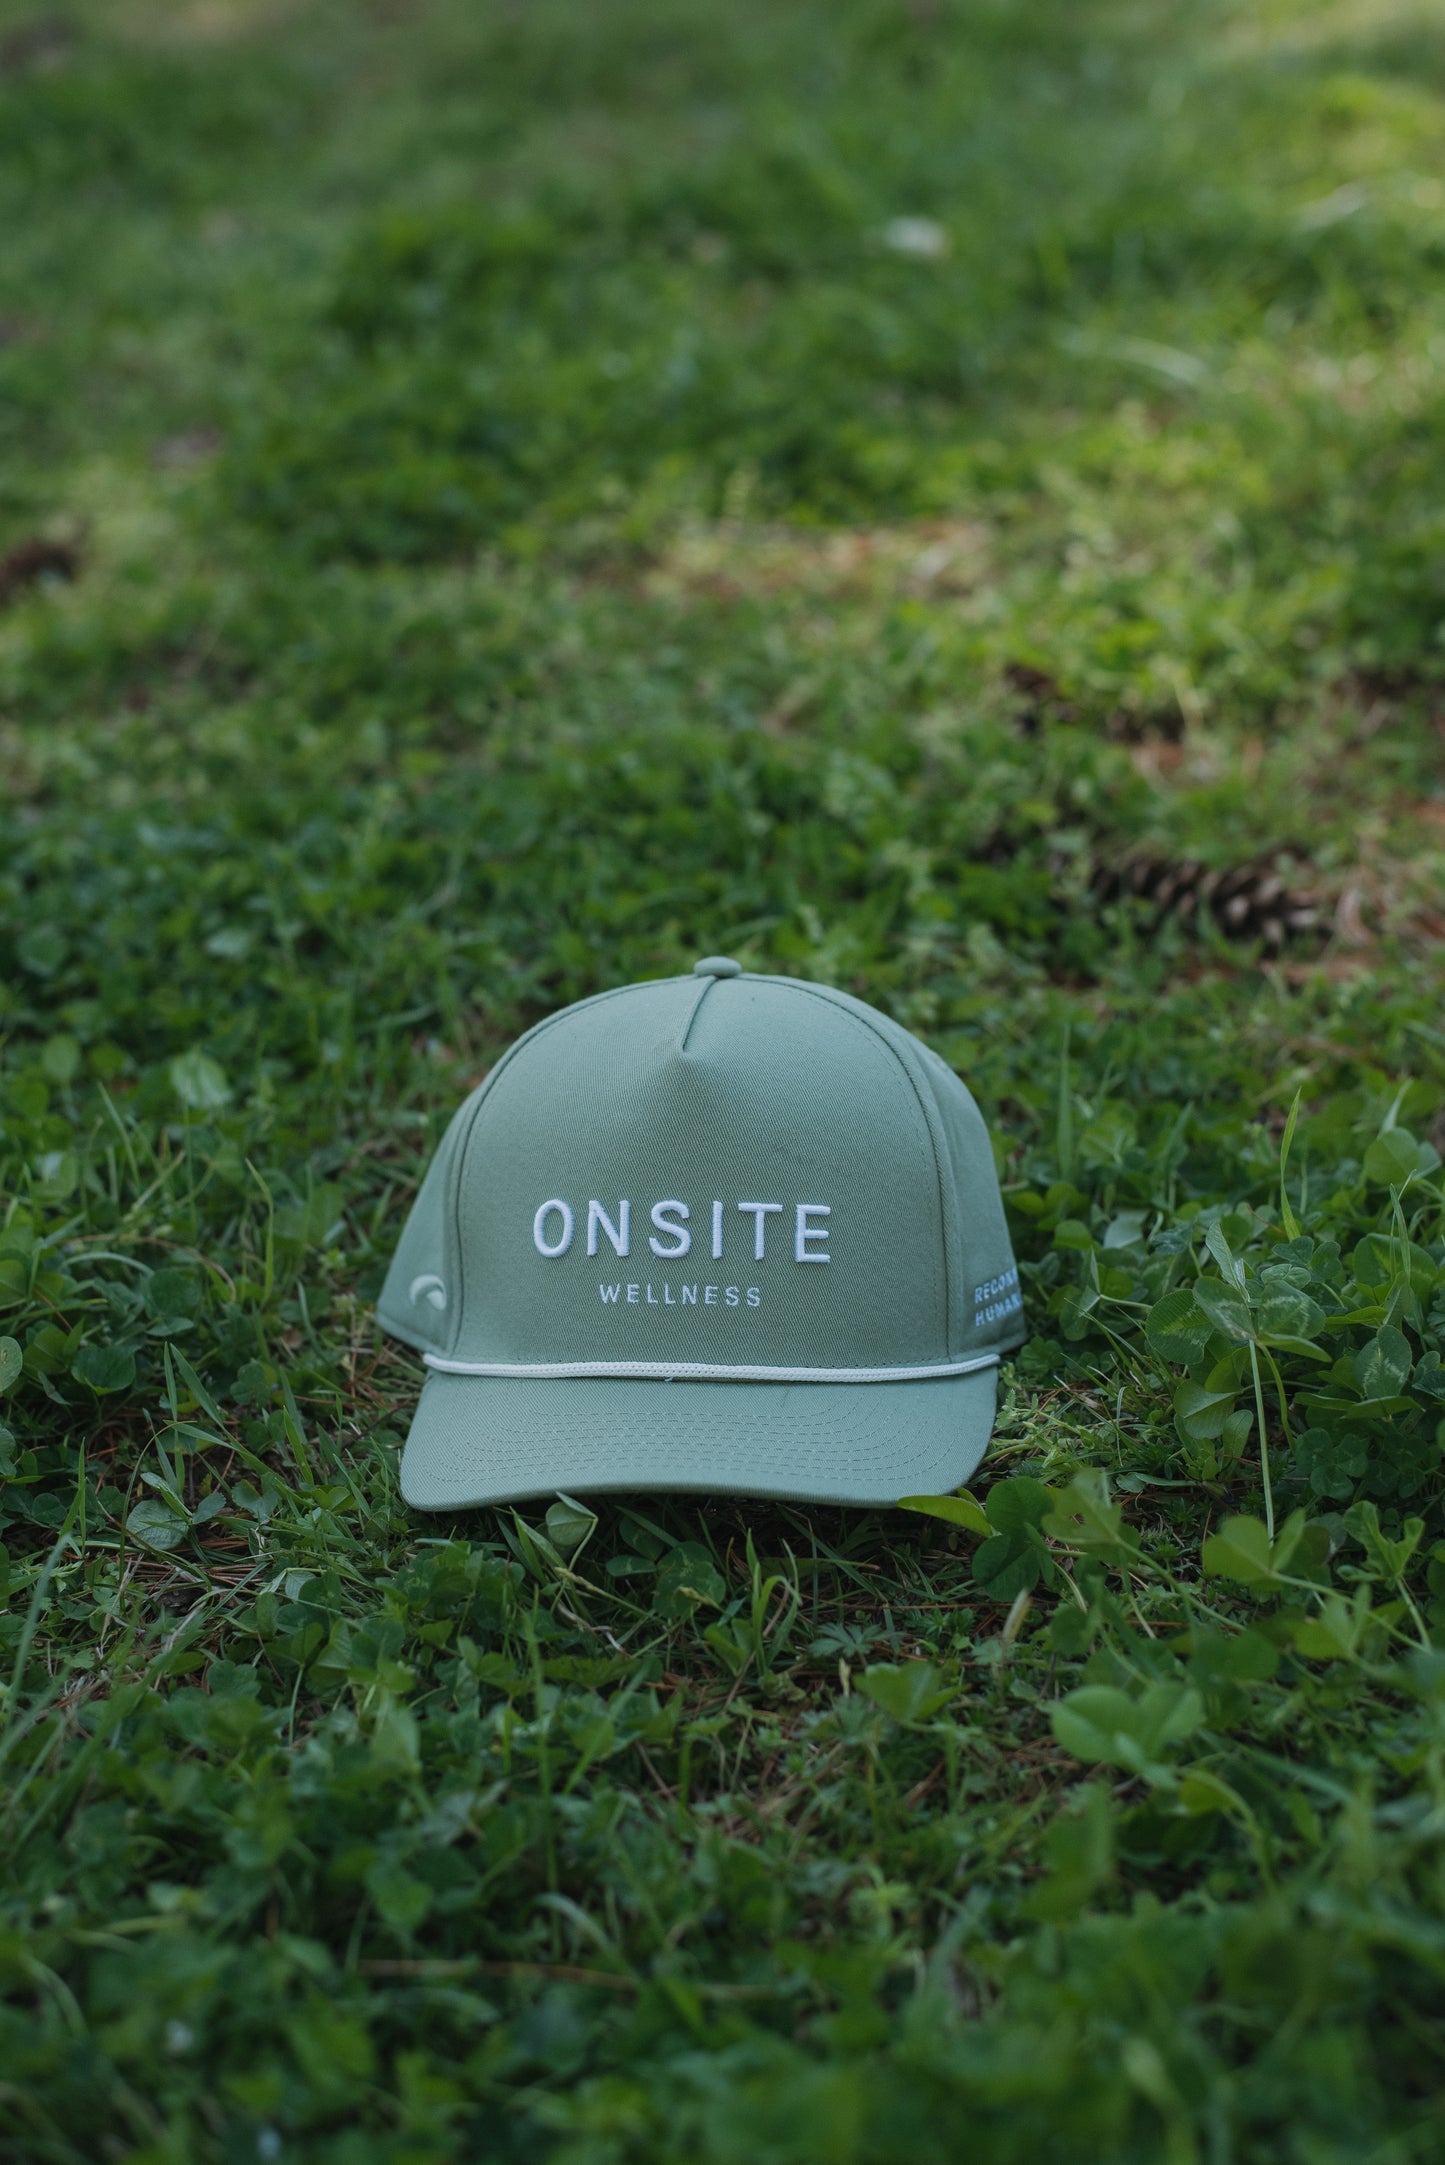 Onsite Wellness Hat - Reconnecting Humanity